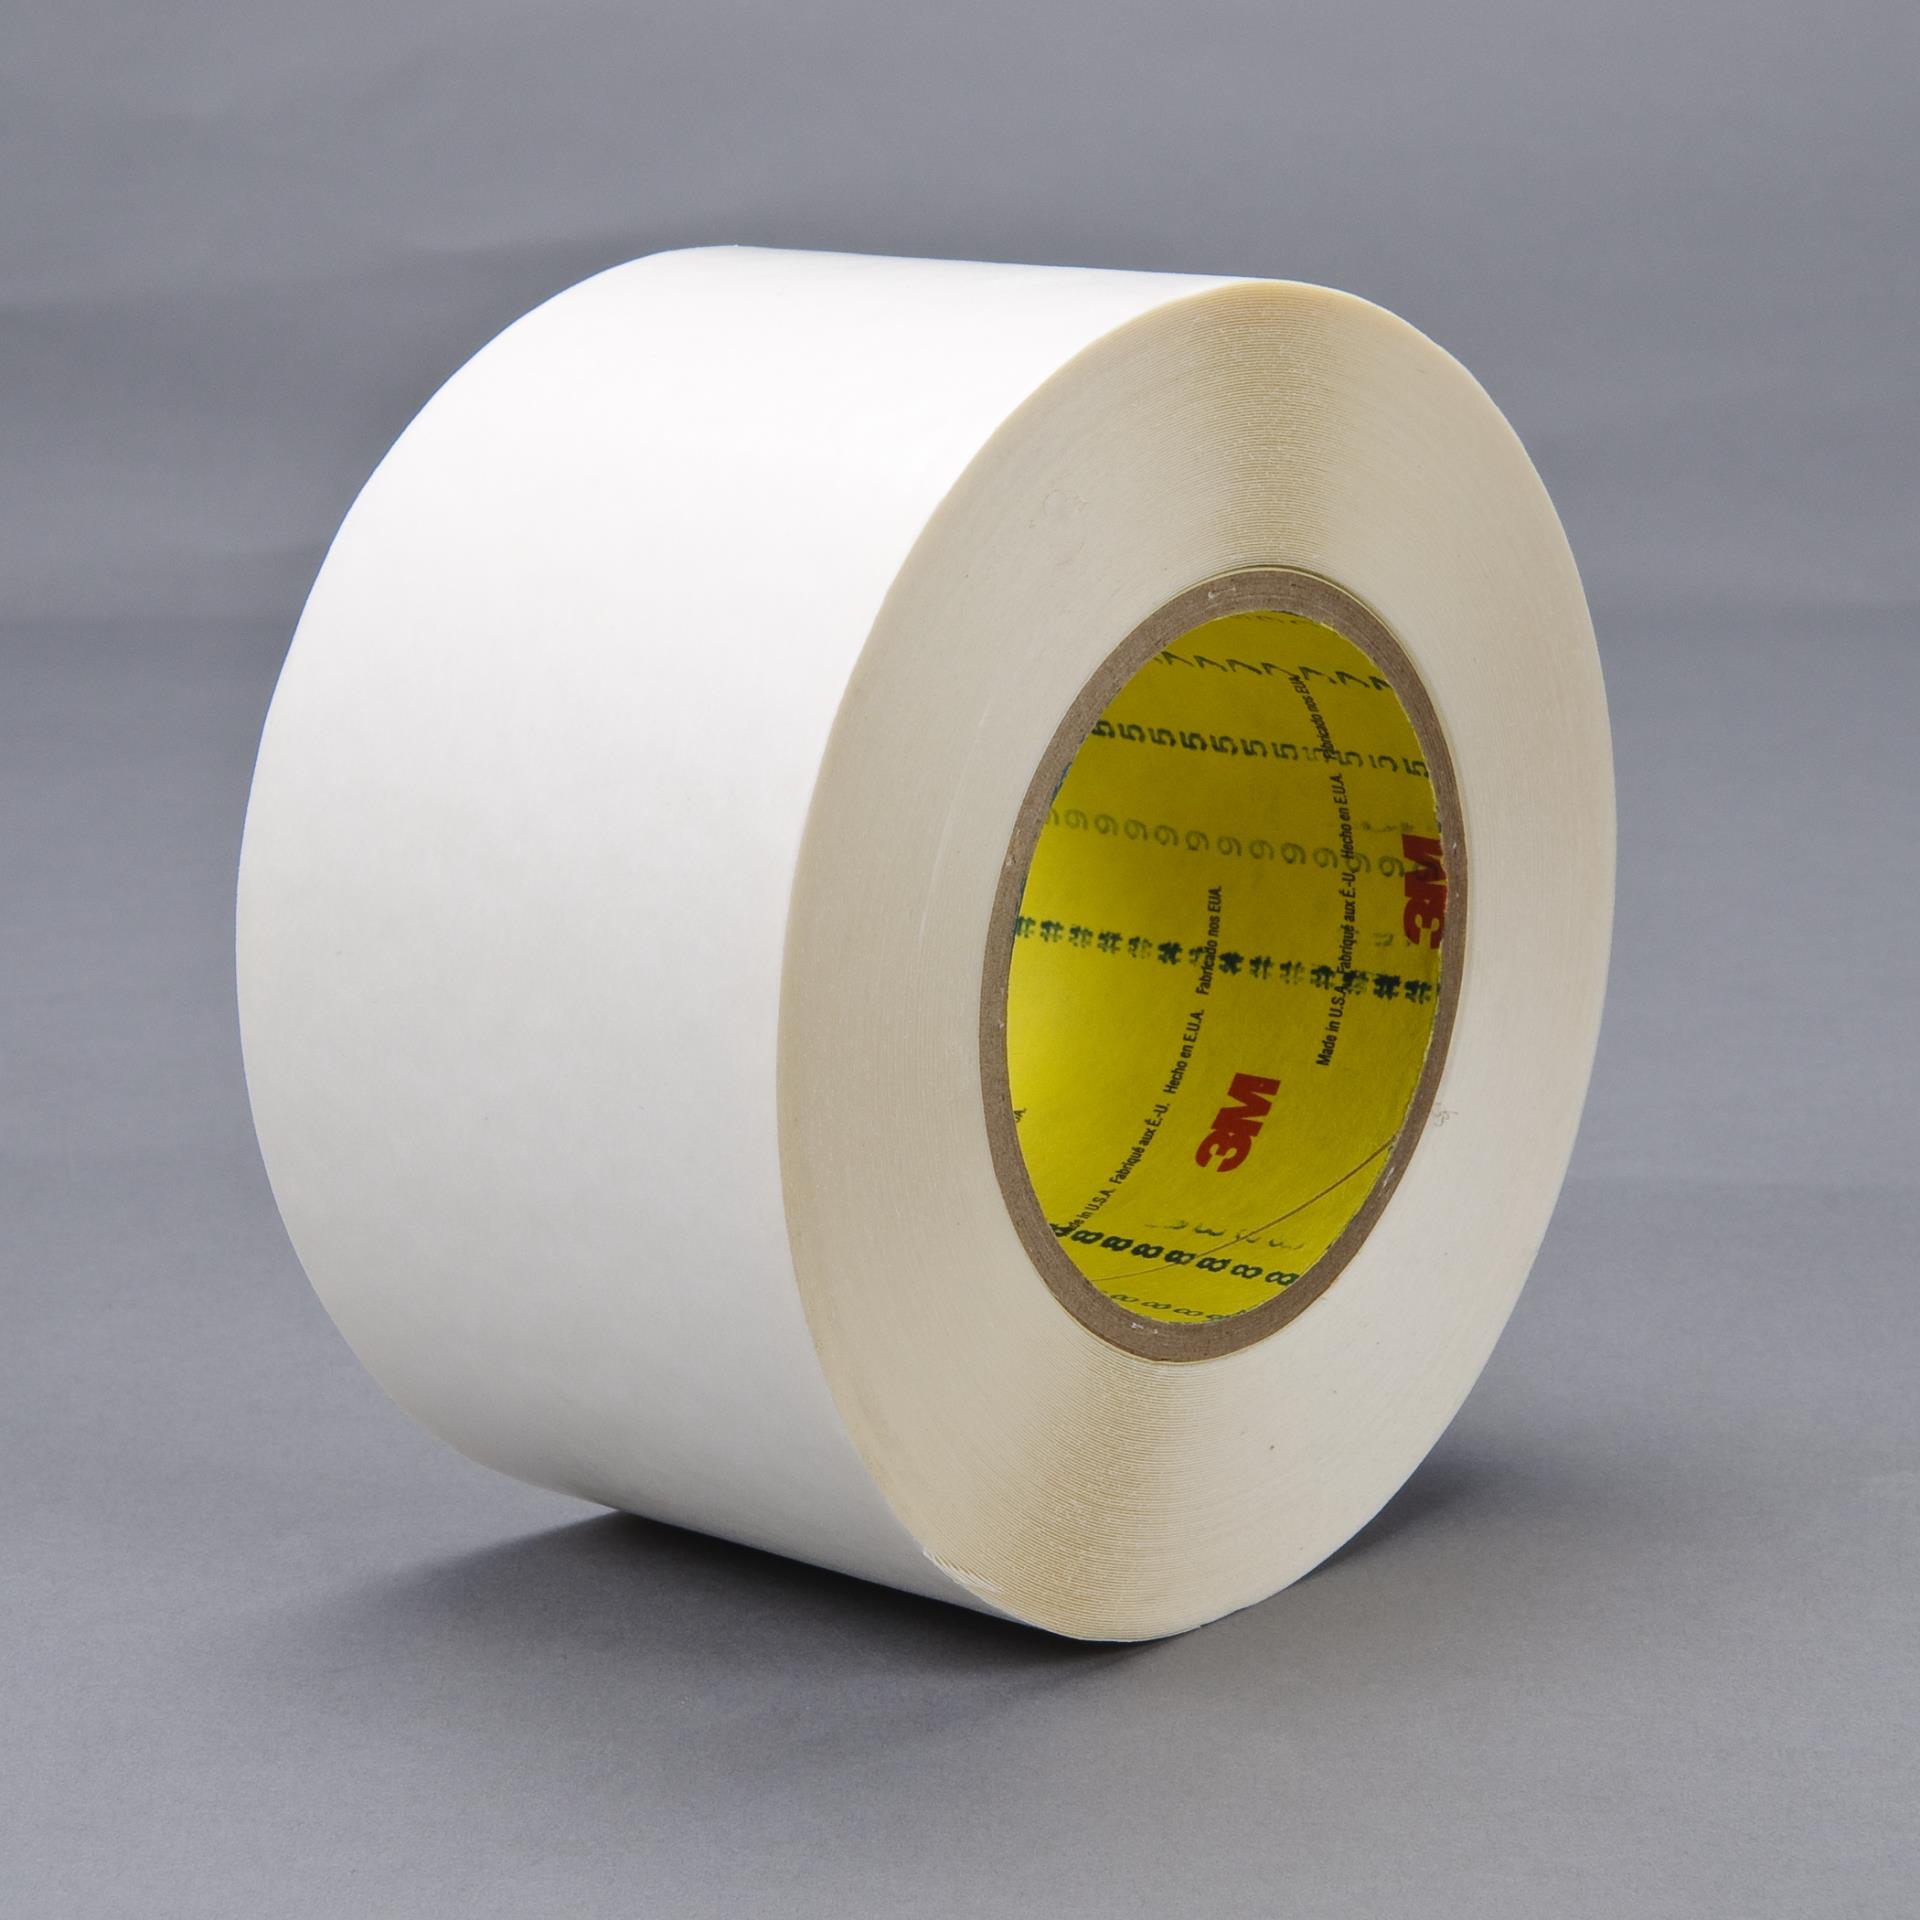 Polythene Jointing Tape 100mm X 33M Rubber-Based Adhesive On Pvc Carrier